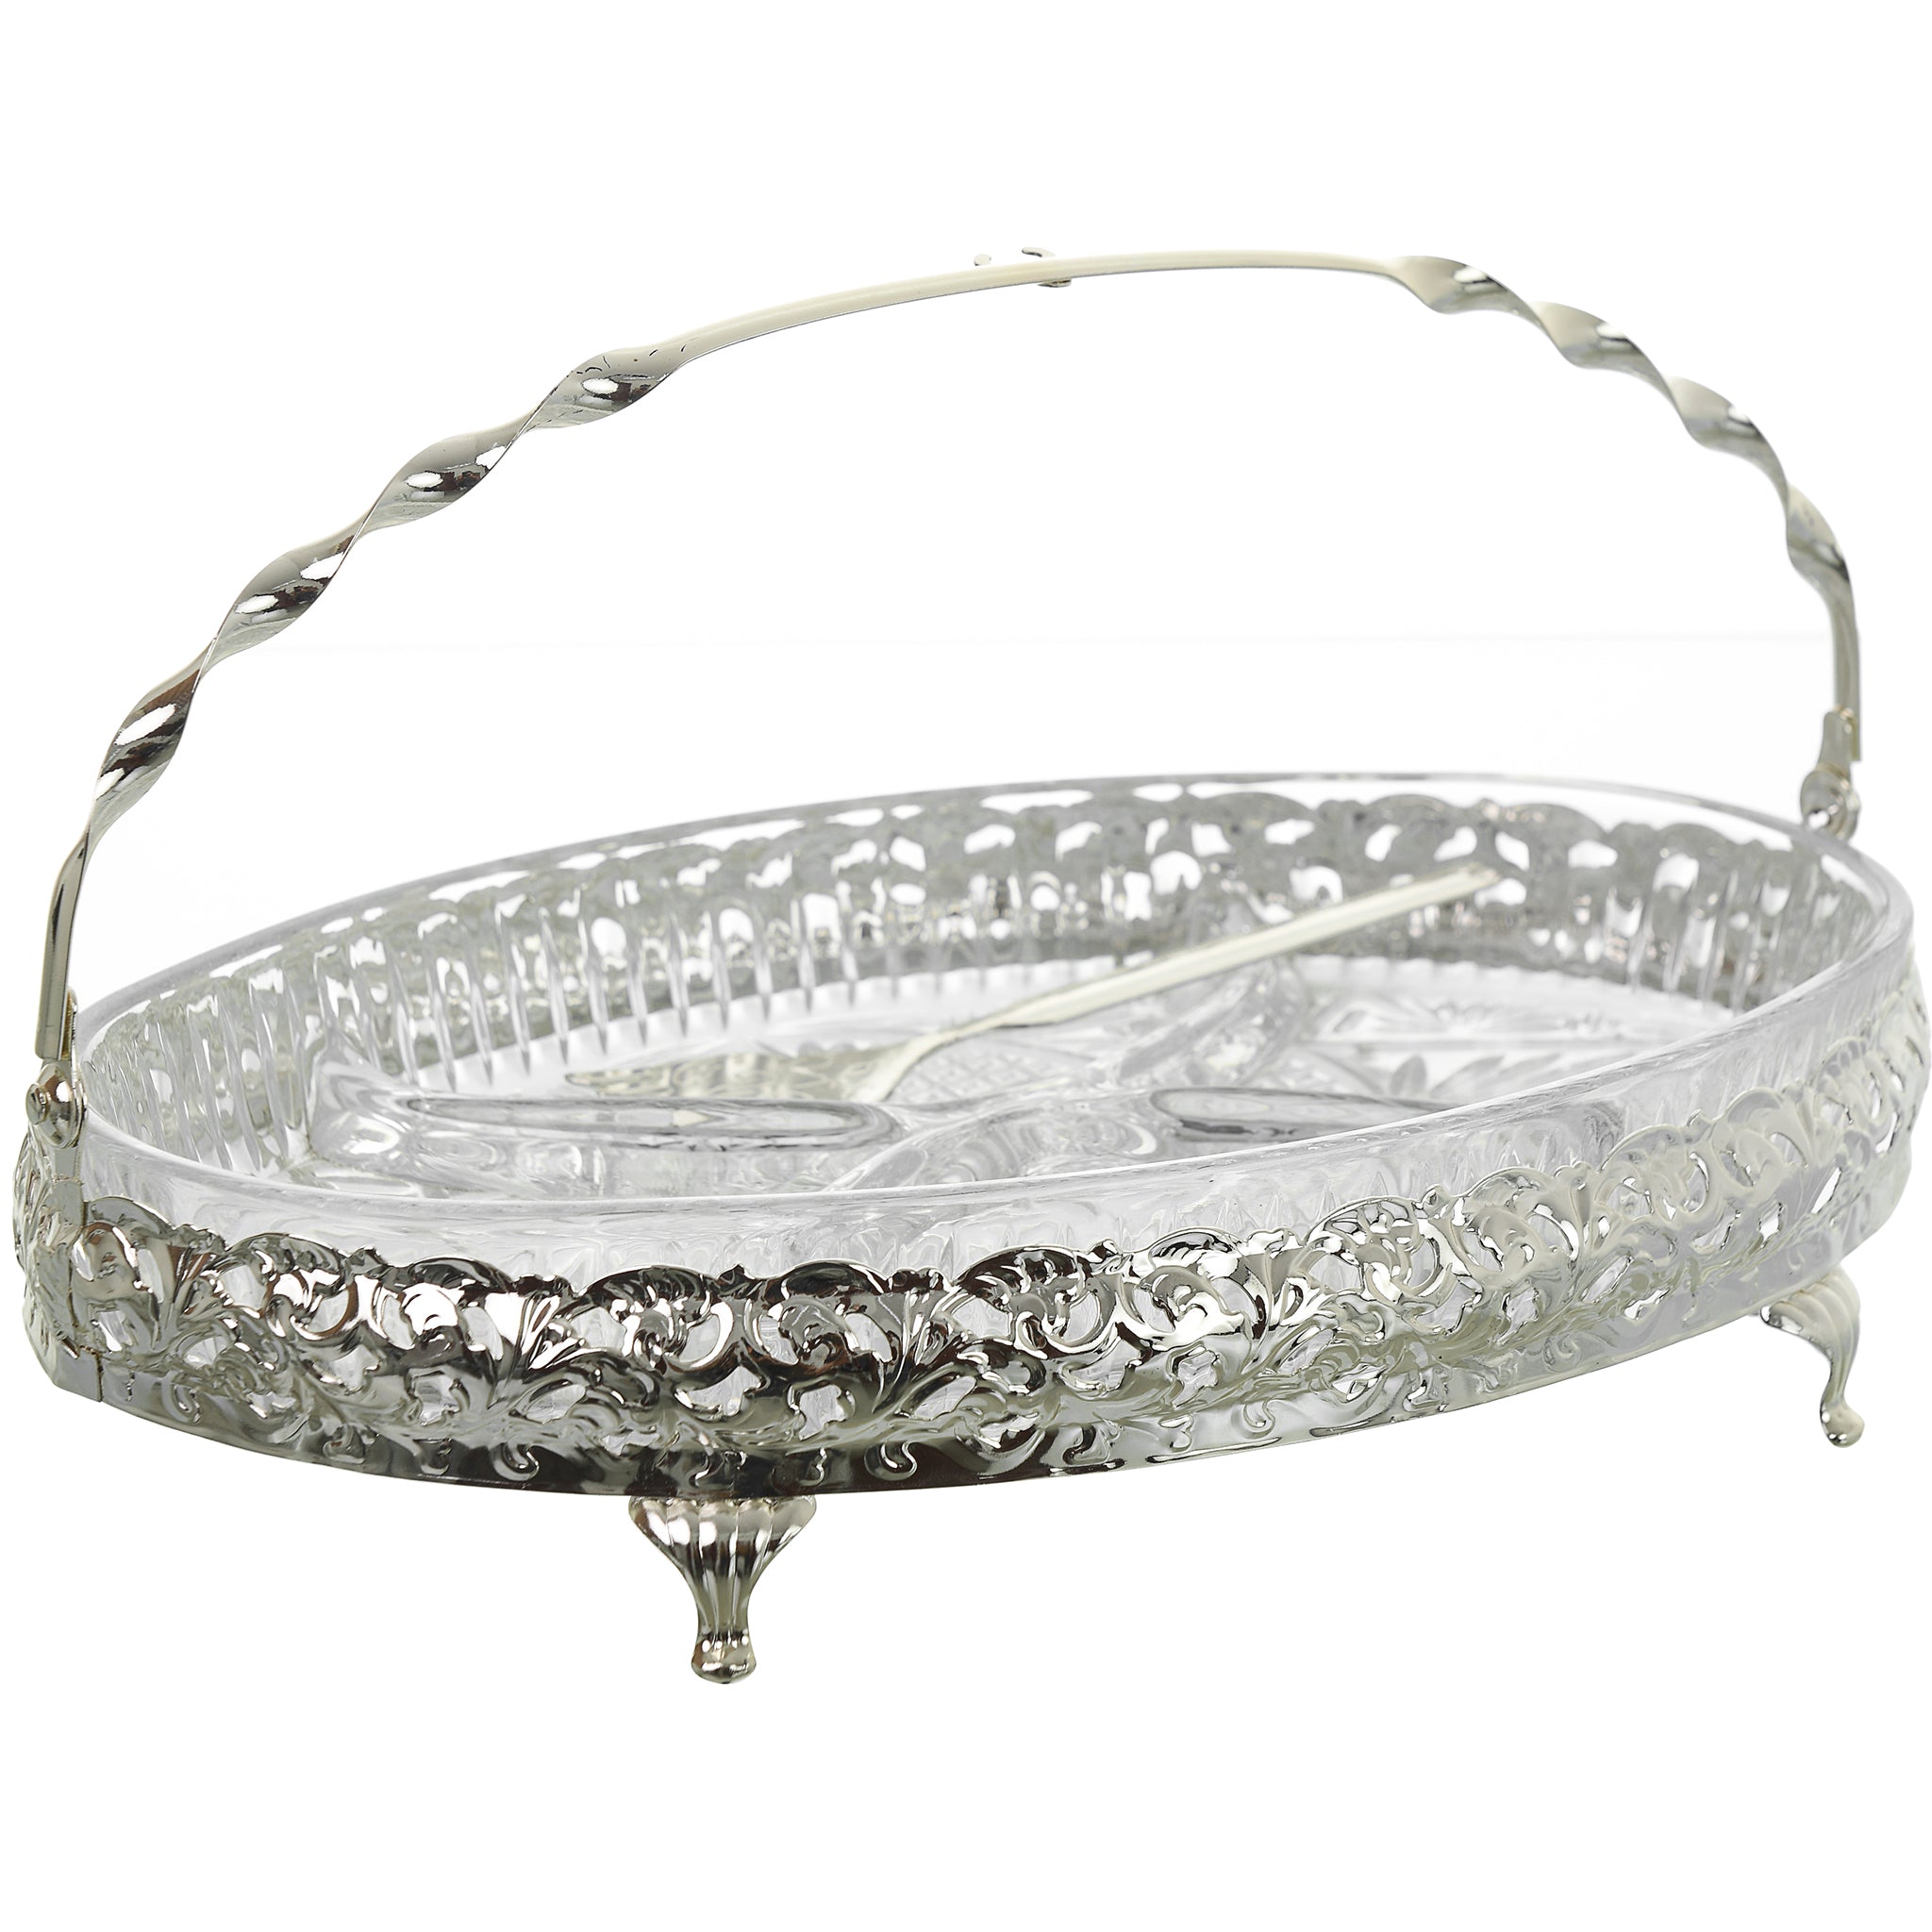 Queen Anne - Oval Hors d'oeuvre 4 Parts with Swing Handle & Fork - Silver Plated Metal & Glass - 29x20cm - 26000296